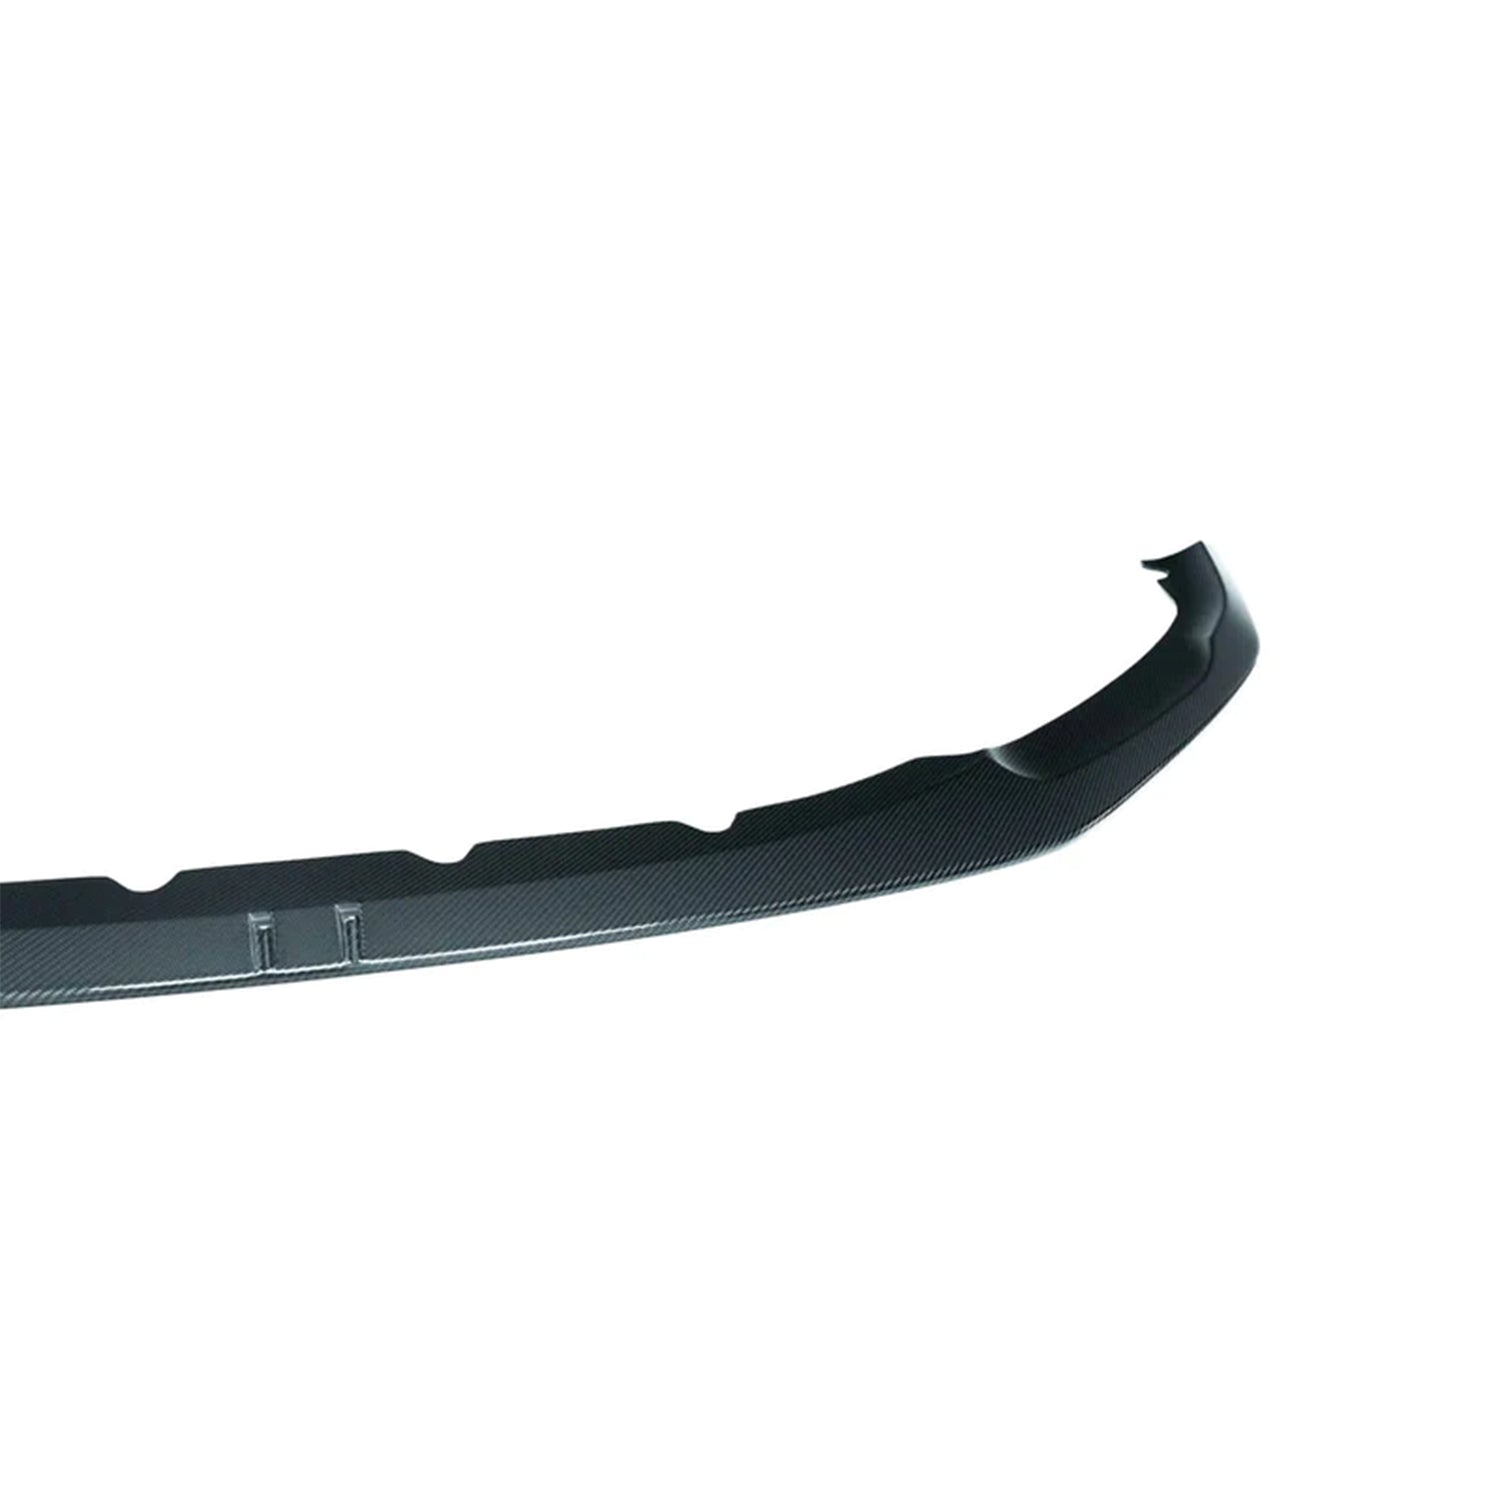 Adro Front Splitter For Adro Front Bumper - BMW G80 G81 M3 & G82 G83 M4